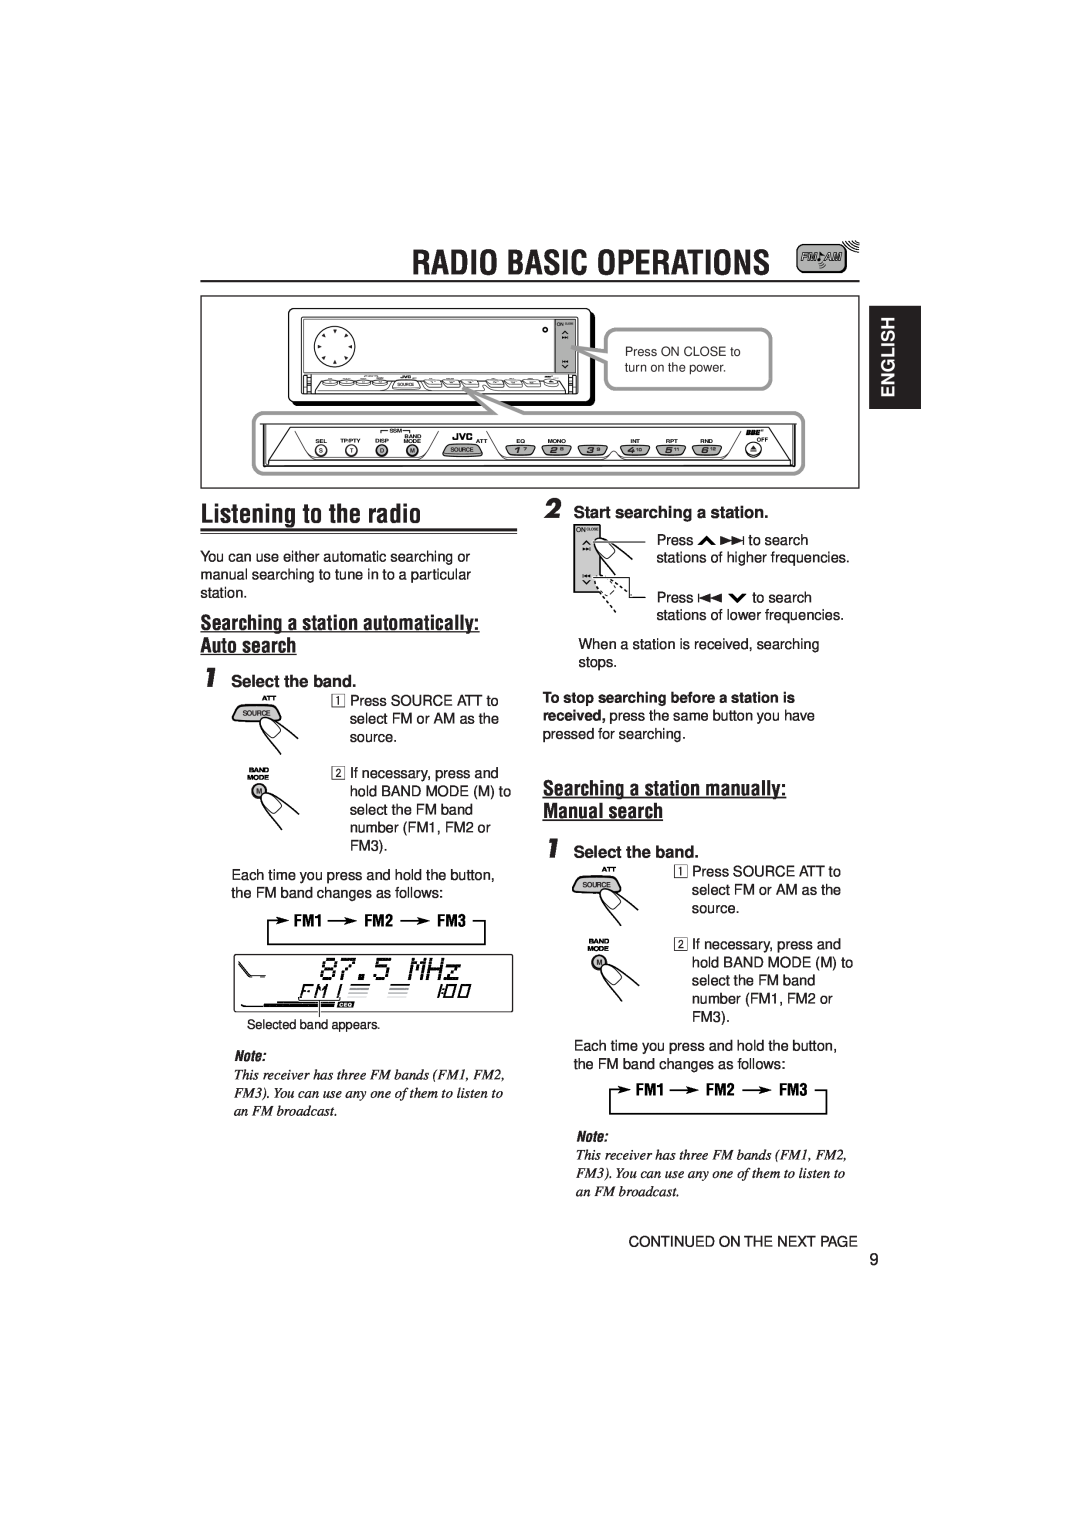 JVC PIM171200 manual Radio Basic Operations, Listening to the radio, Searching a station automatically Auto search, English 